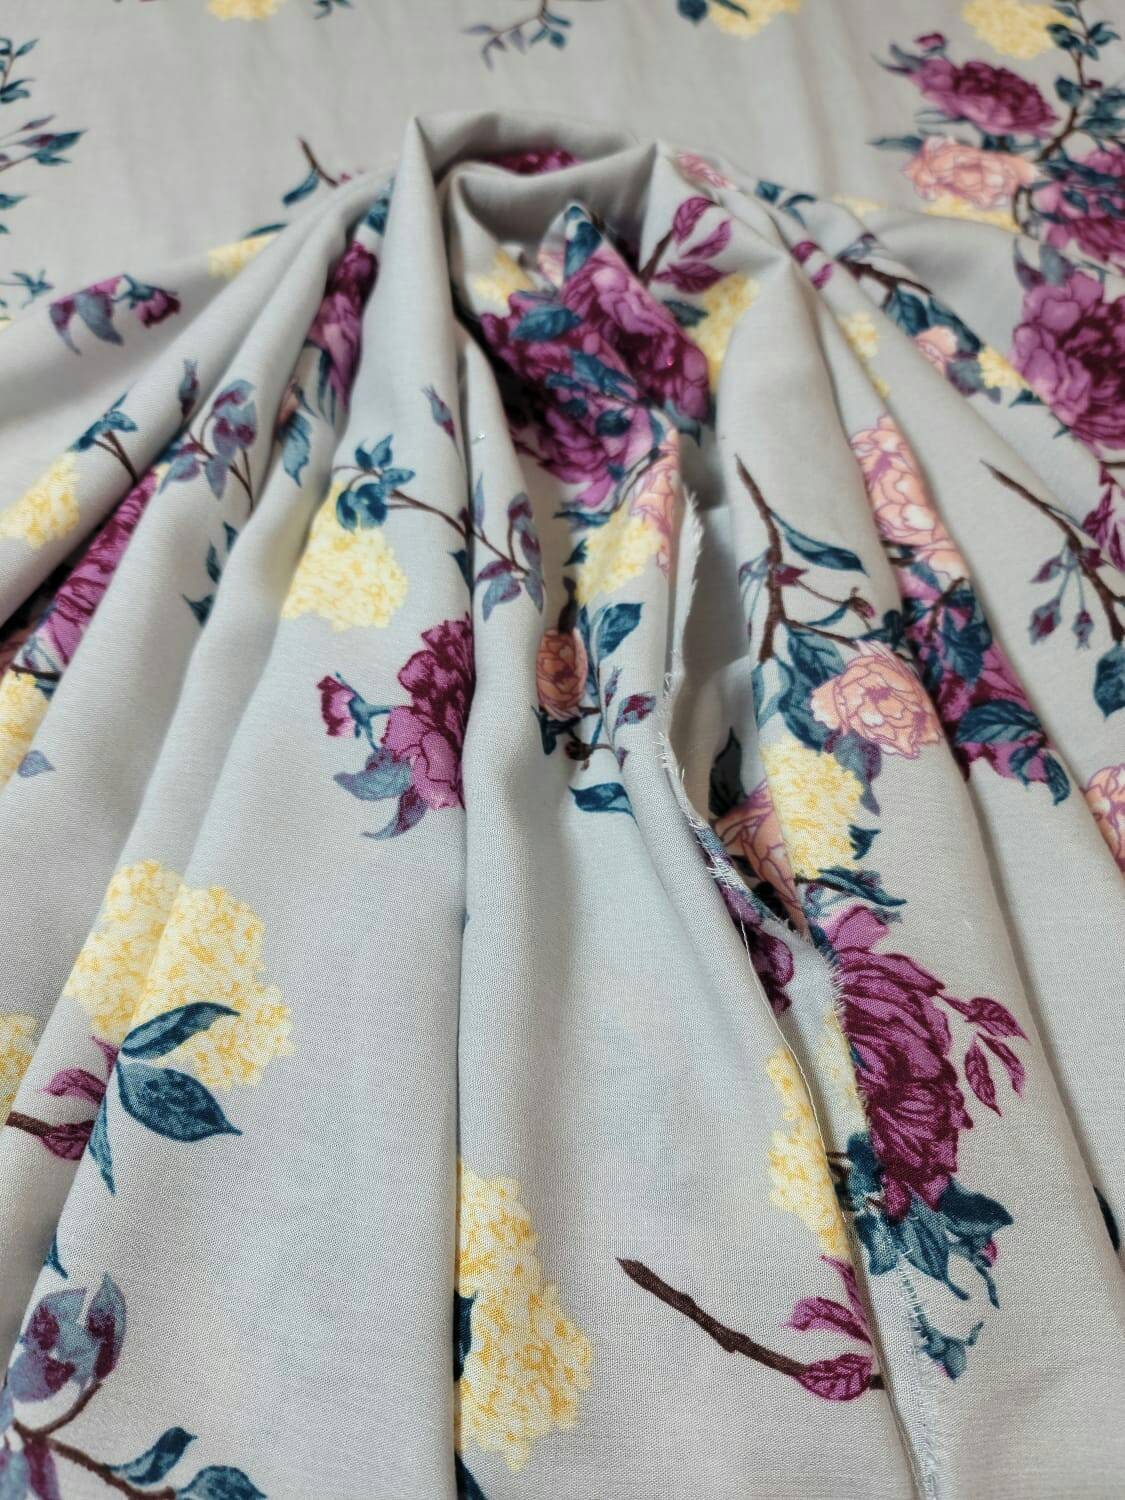 Rayon Challis Fabric By The Yard Ligth Gray Background Pinkish Floral Flowers Multicolor Dress Clothing Fabric By The Yard